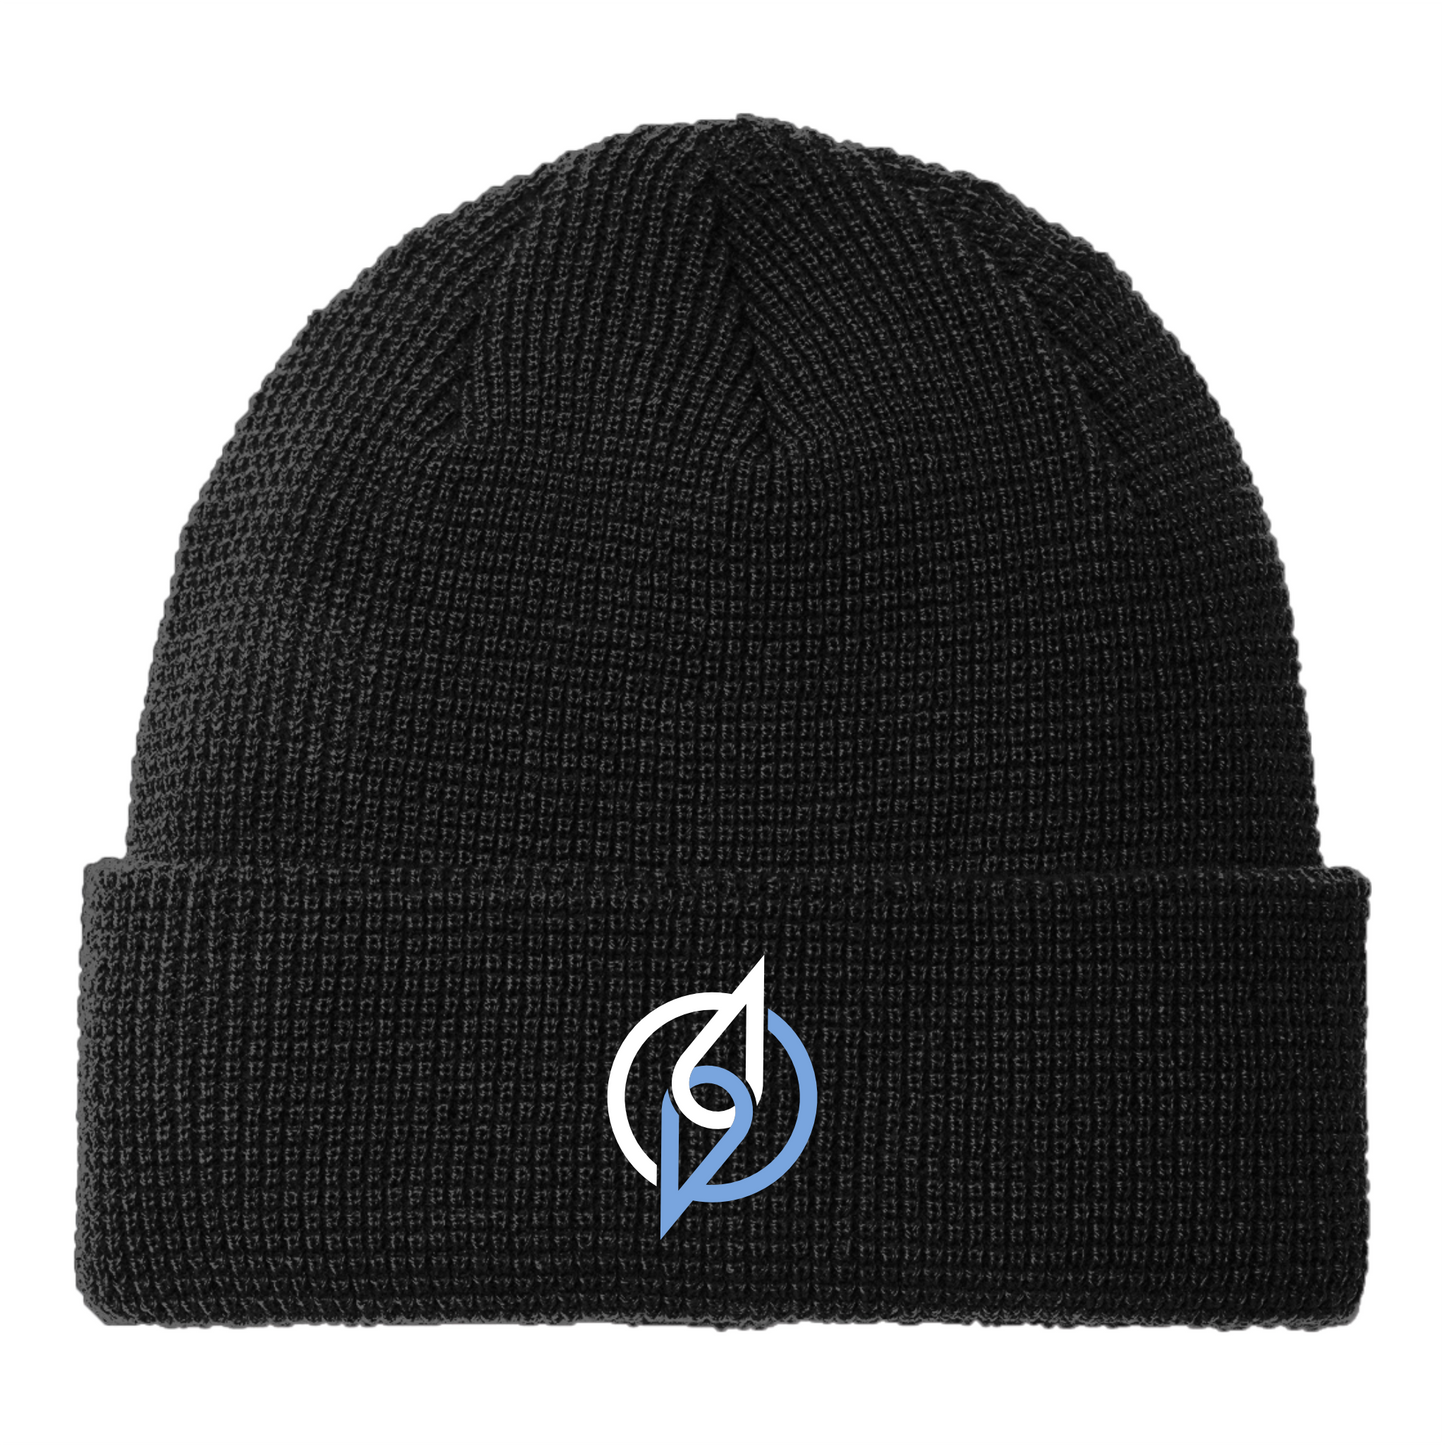 COM036 Thermal Knit Beanie